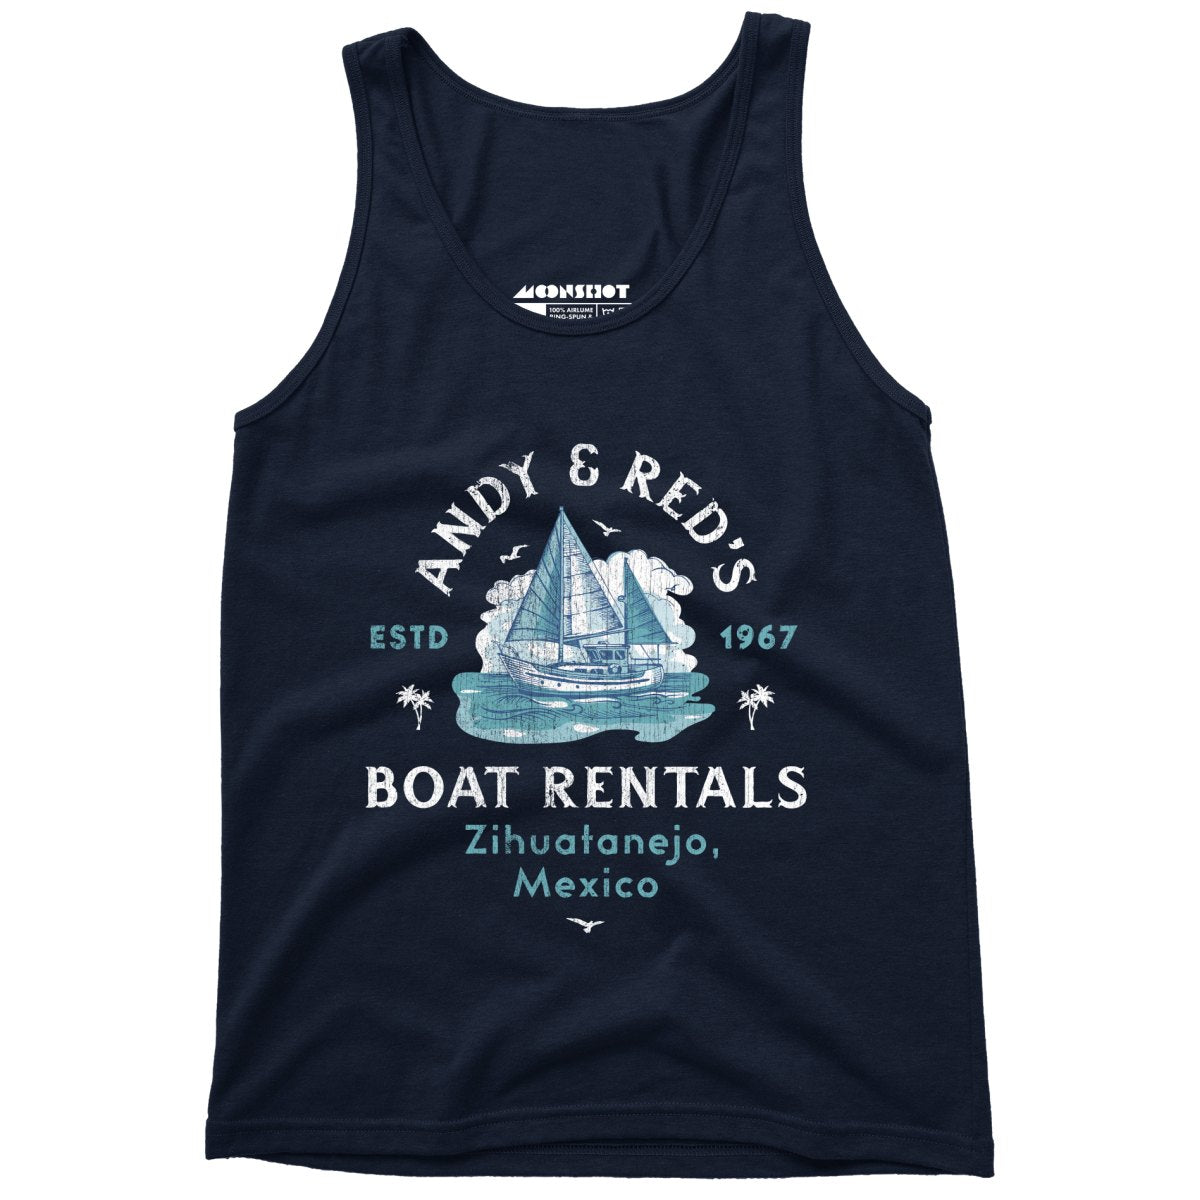 Andy & Red's Boat Rentals - Unisex Tank Top